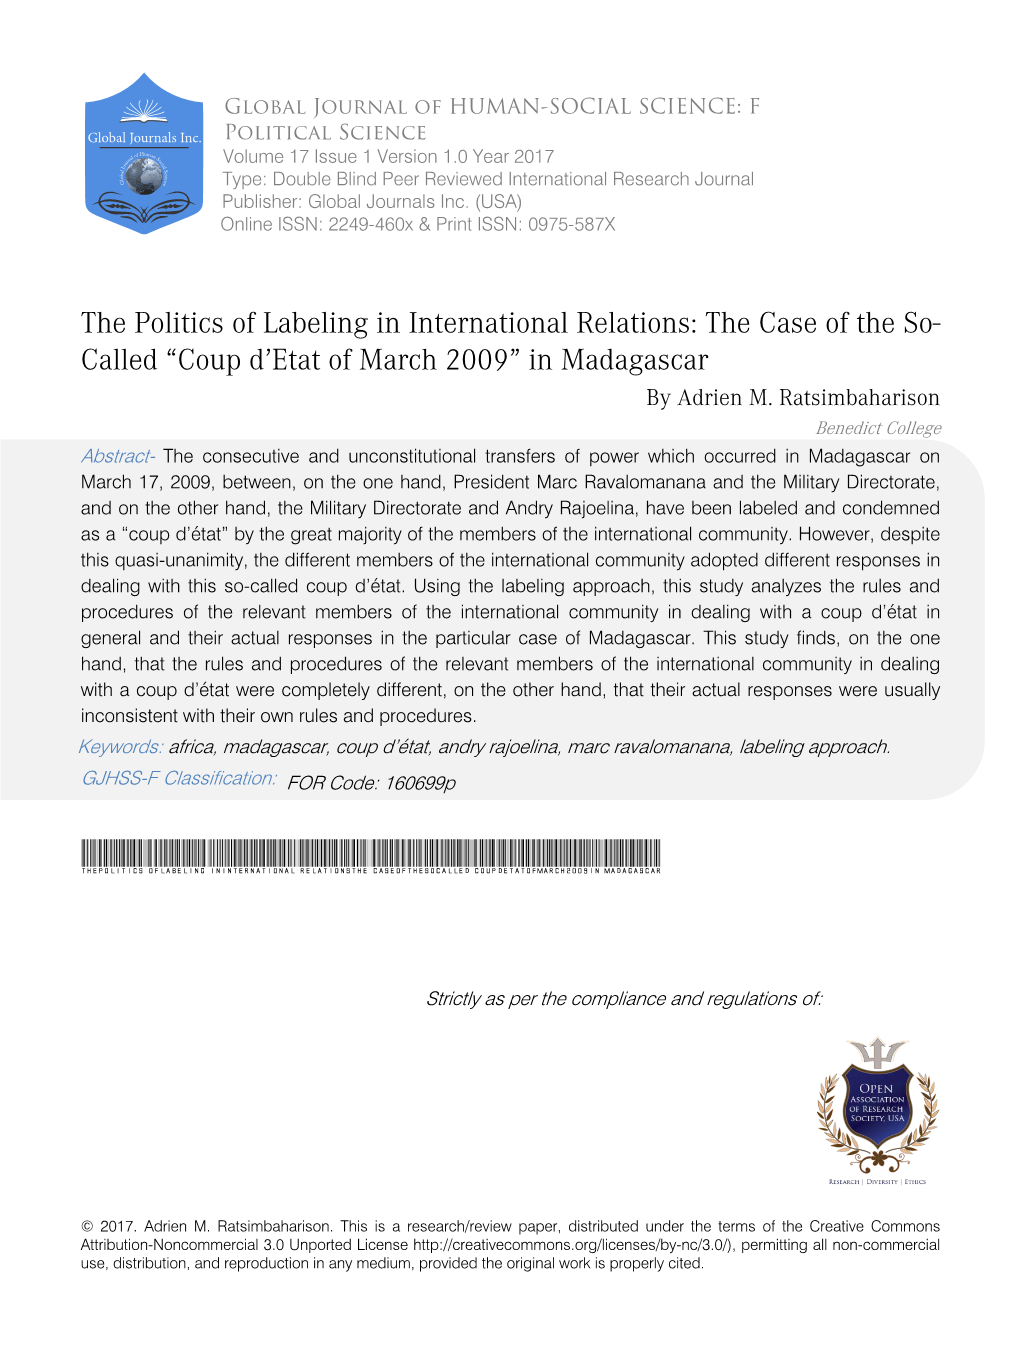 The Politics of Labeling in International Relations: the Case of the So- Called “Coup D’Etat of March 2009” in Madagascar by Adrien M